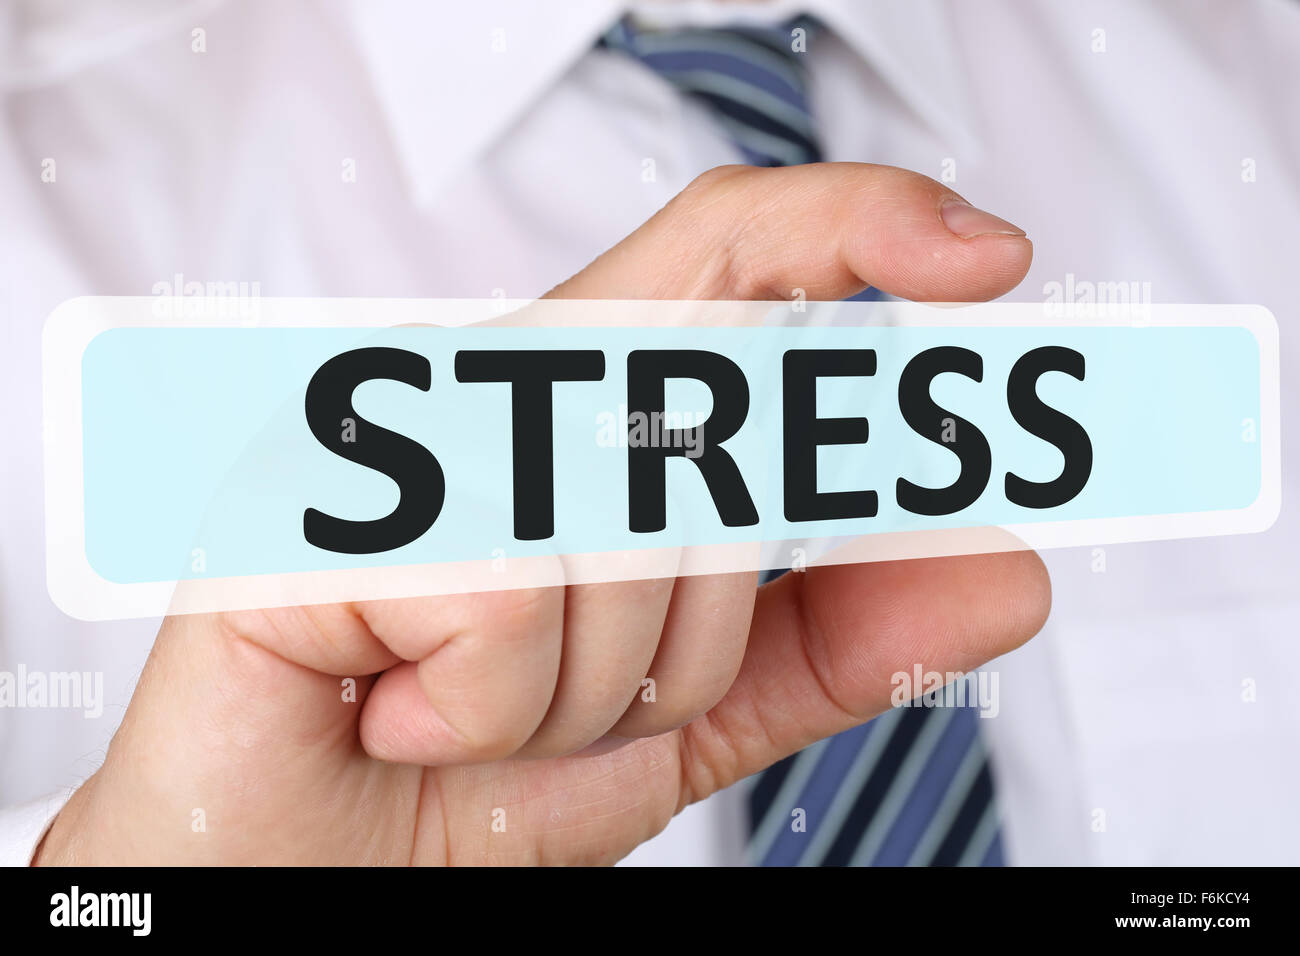 Businessman business concept with stress stressed burnout relaxed at work Stock Photo